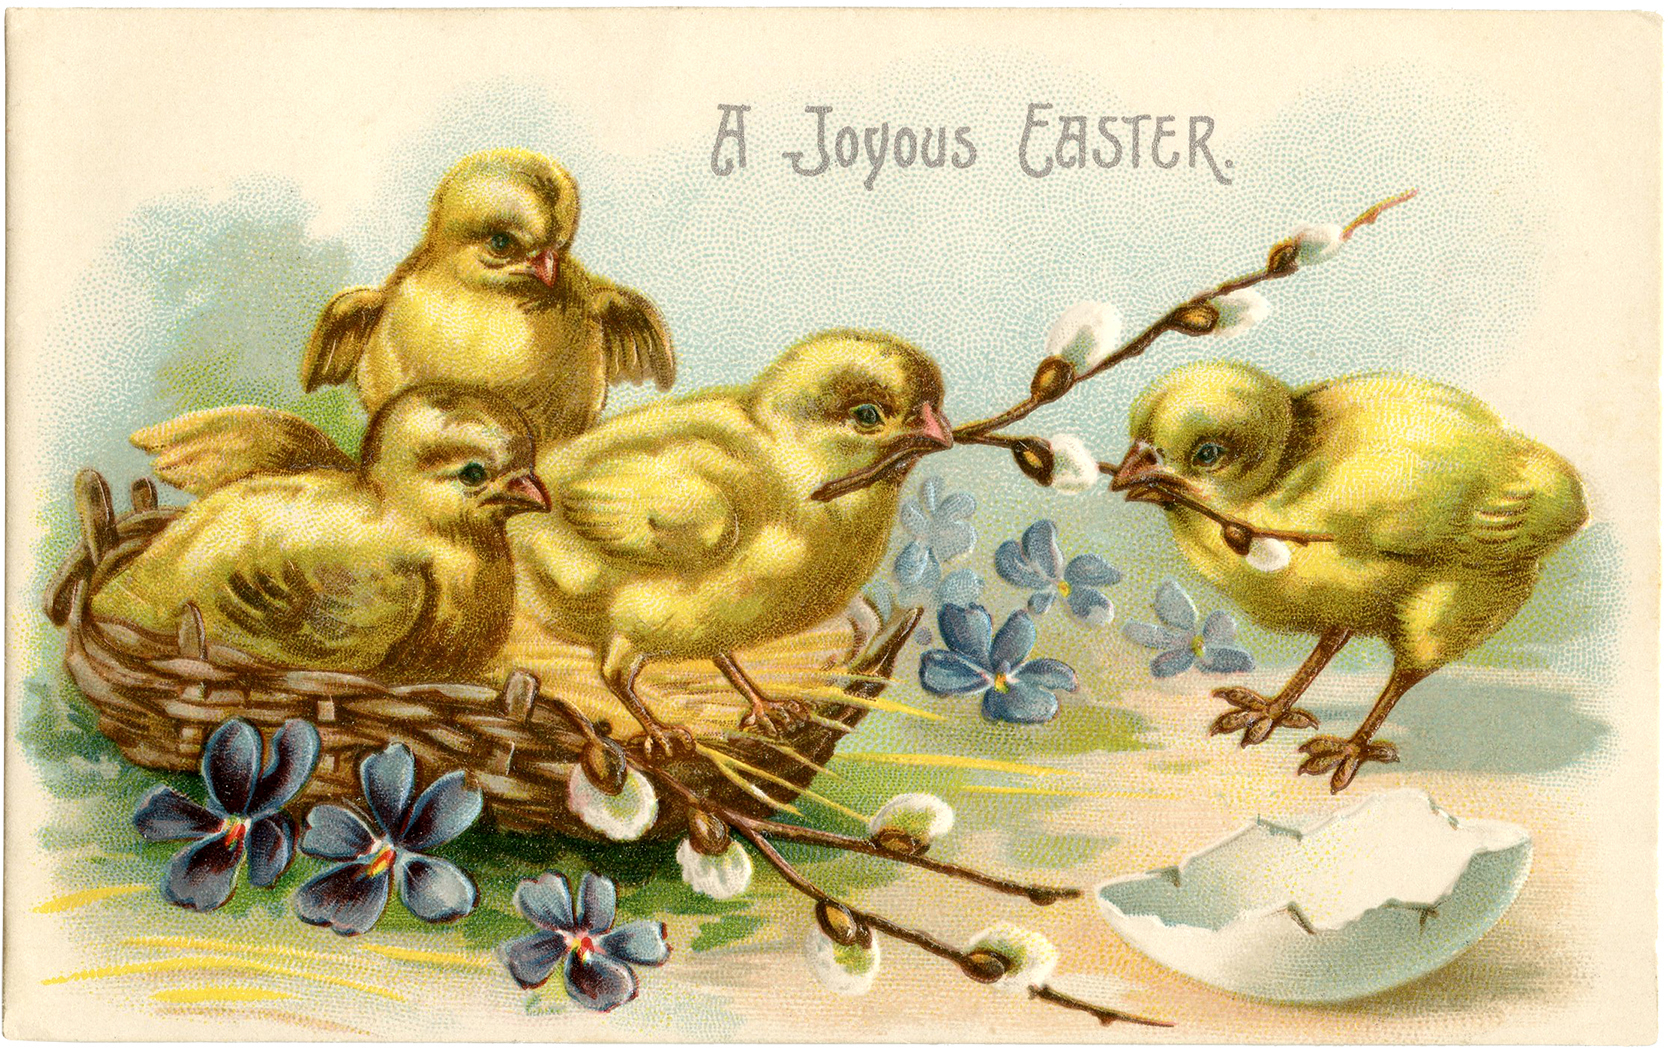 http://thegraphicsfairy.com/wp-content/uploads/2014/04/Easter-Chicks-Graphic-GraphicsFairy.jpg